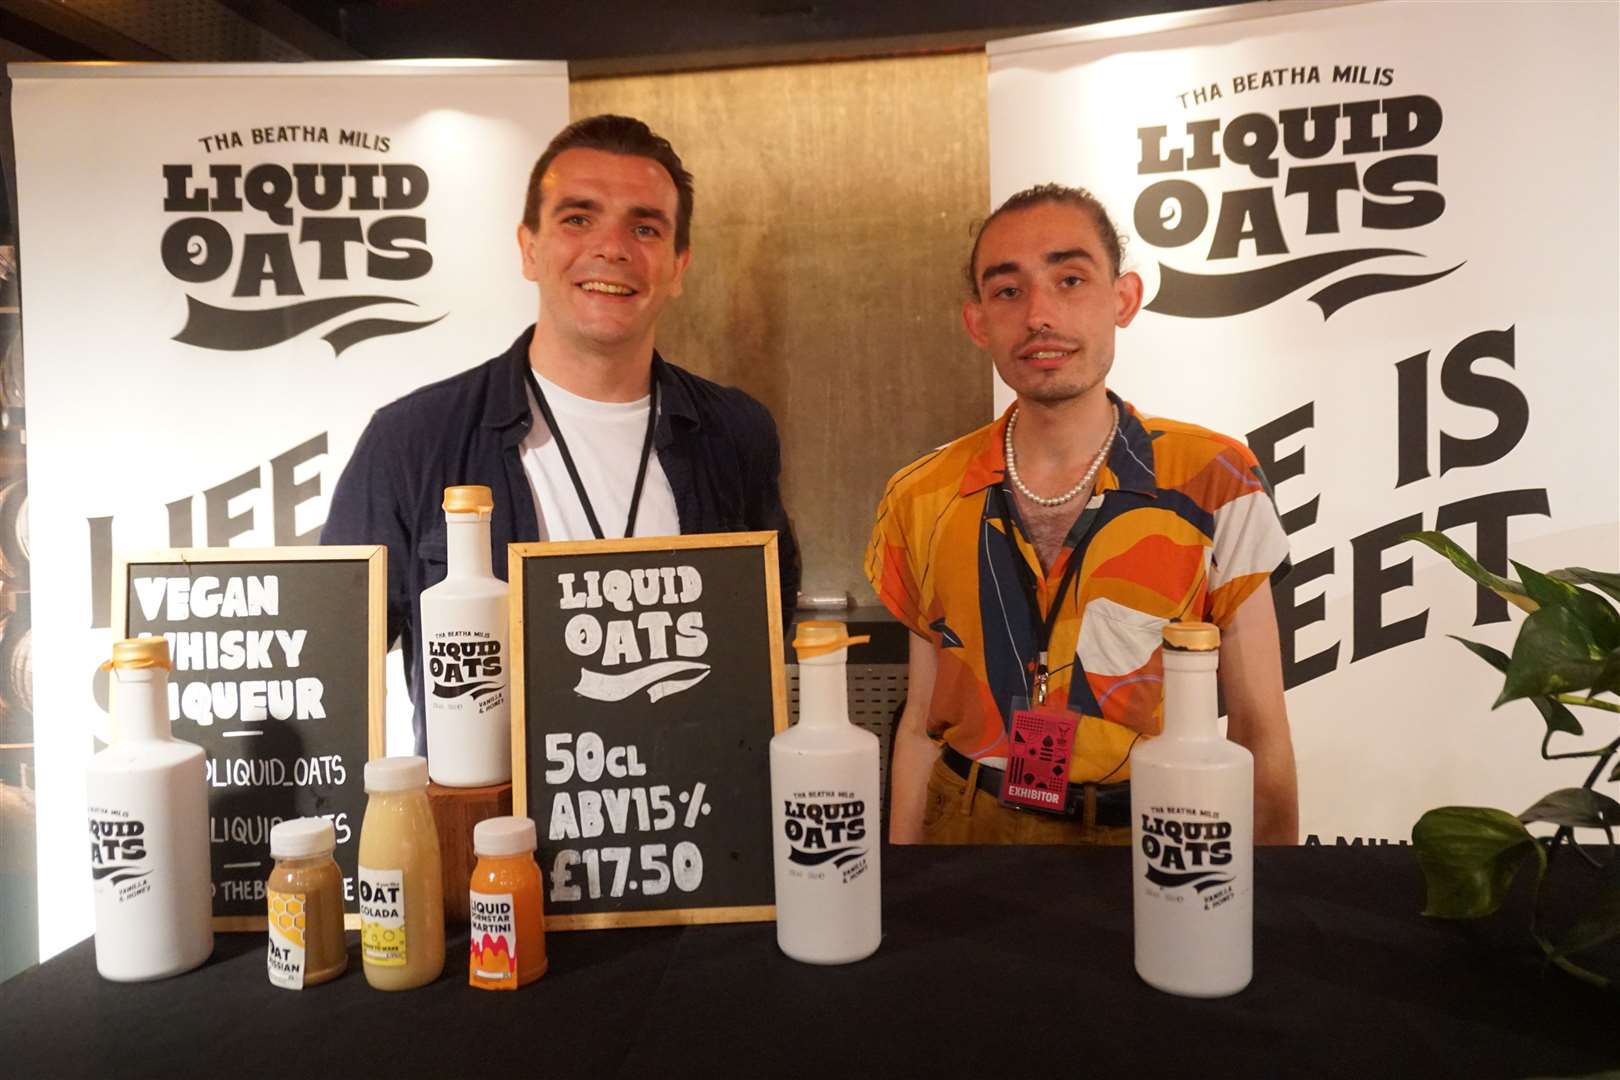 The team from Liquid Oats, from Glasgow, brought a vegan-friendly cream liquor at the event.